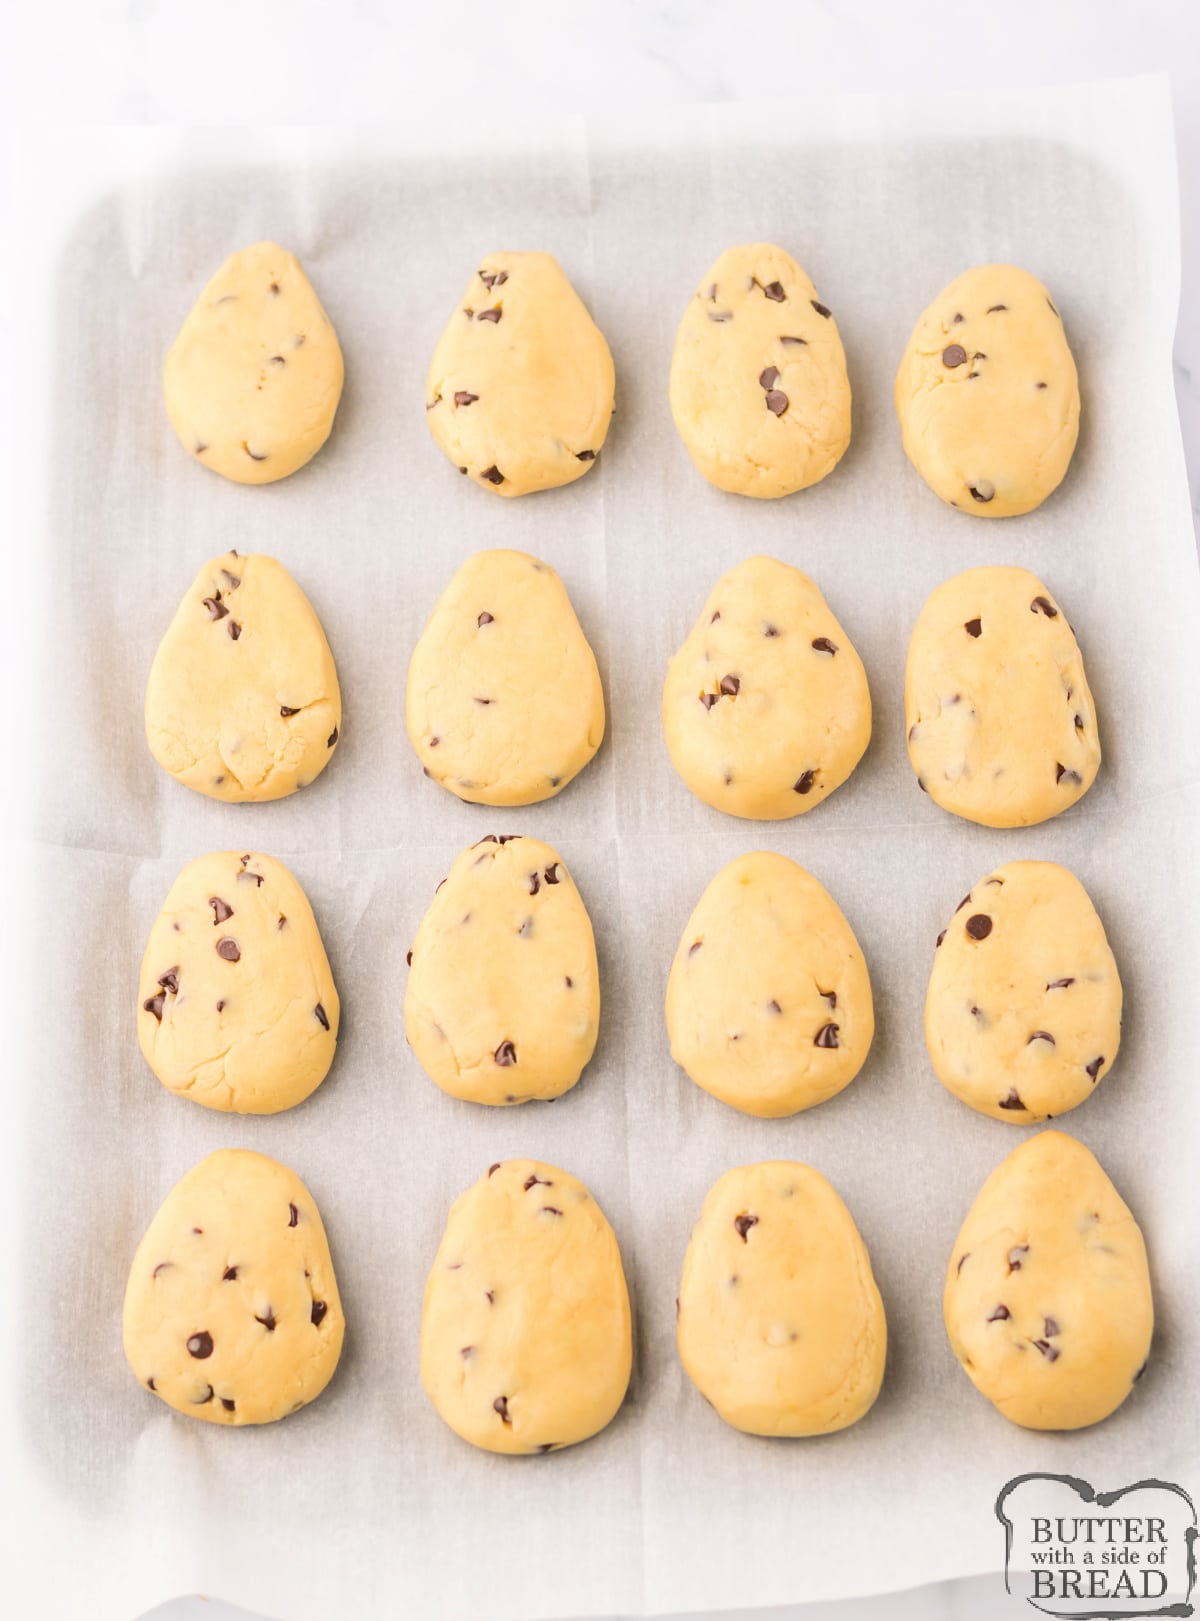 Shaping cookie dough into egg shapes.